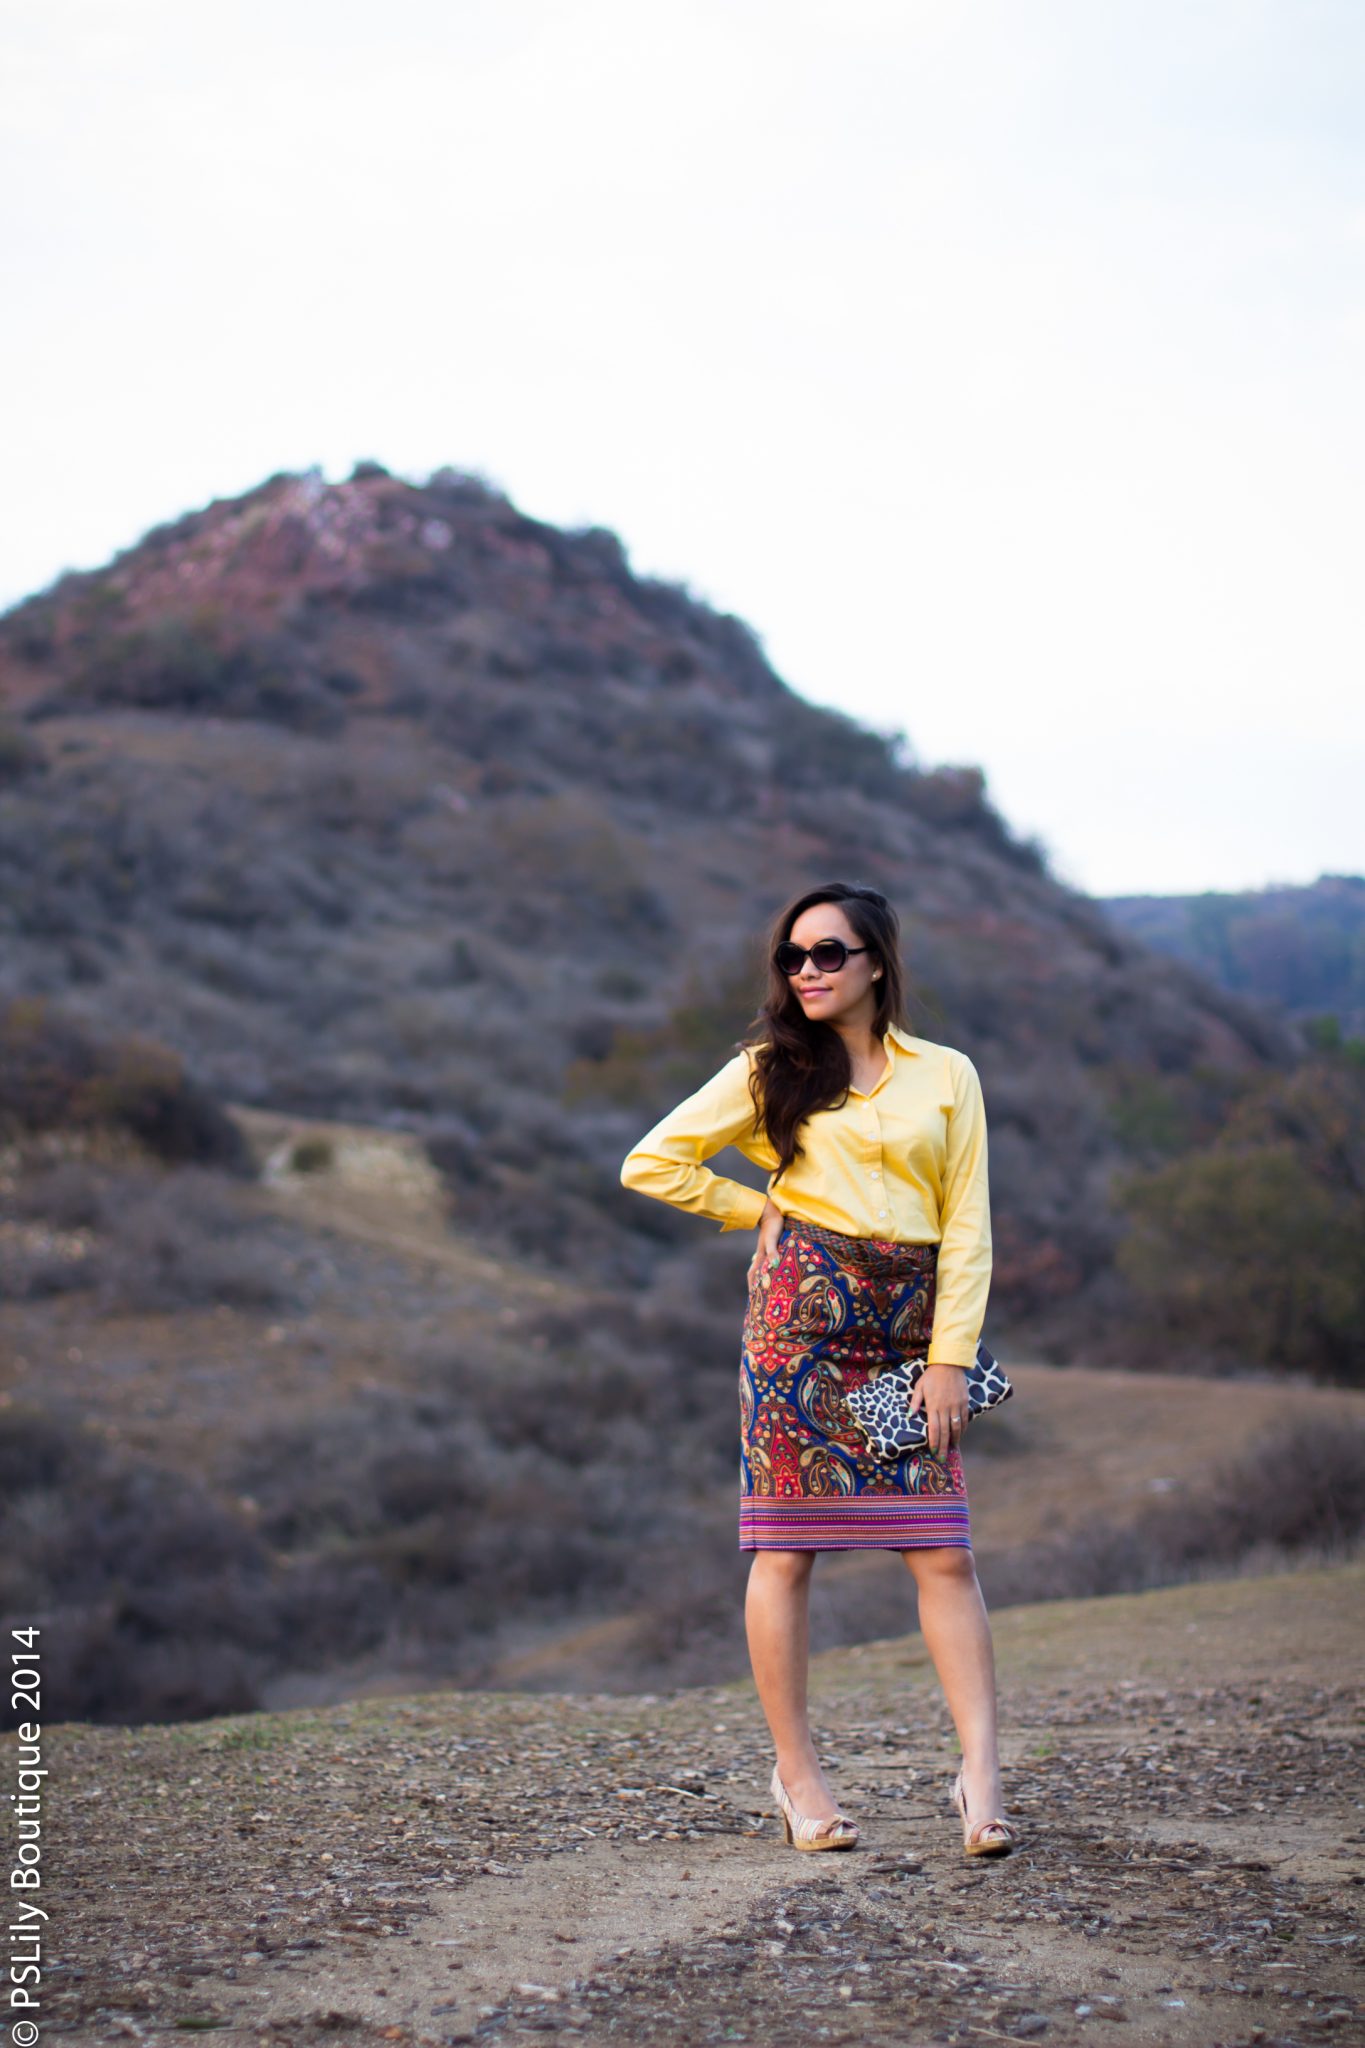 instagram-pslilyboutique-los-angeles-fashion-blogger-yellow shirt, paisley pencil skirt, striped sandals